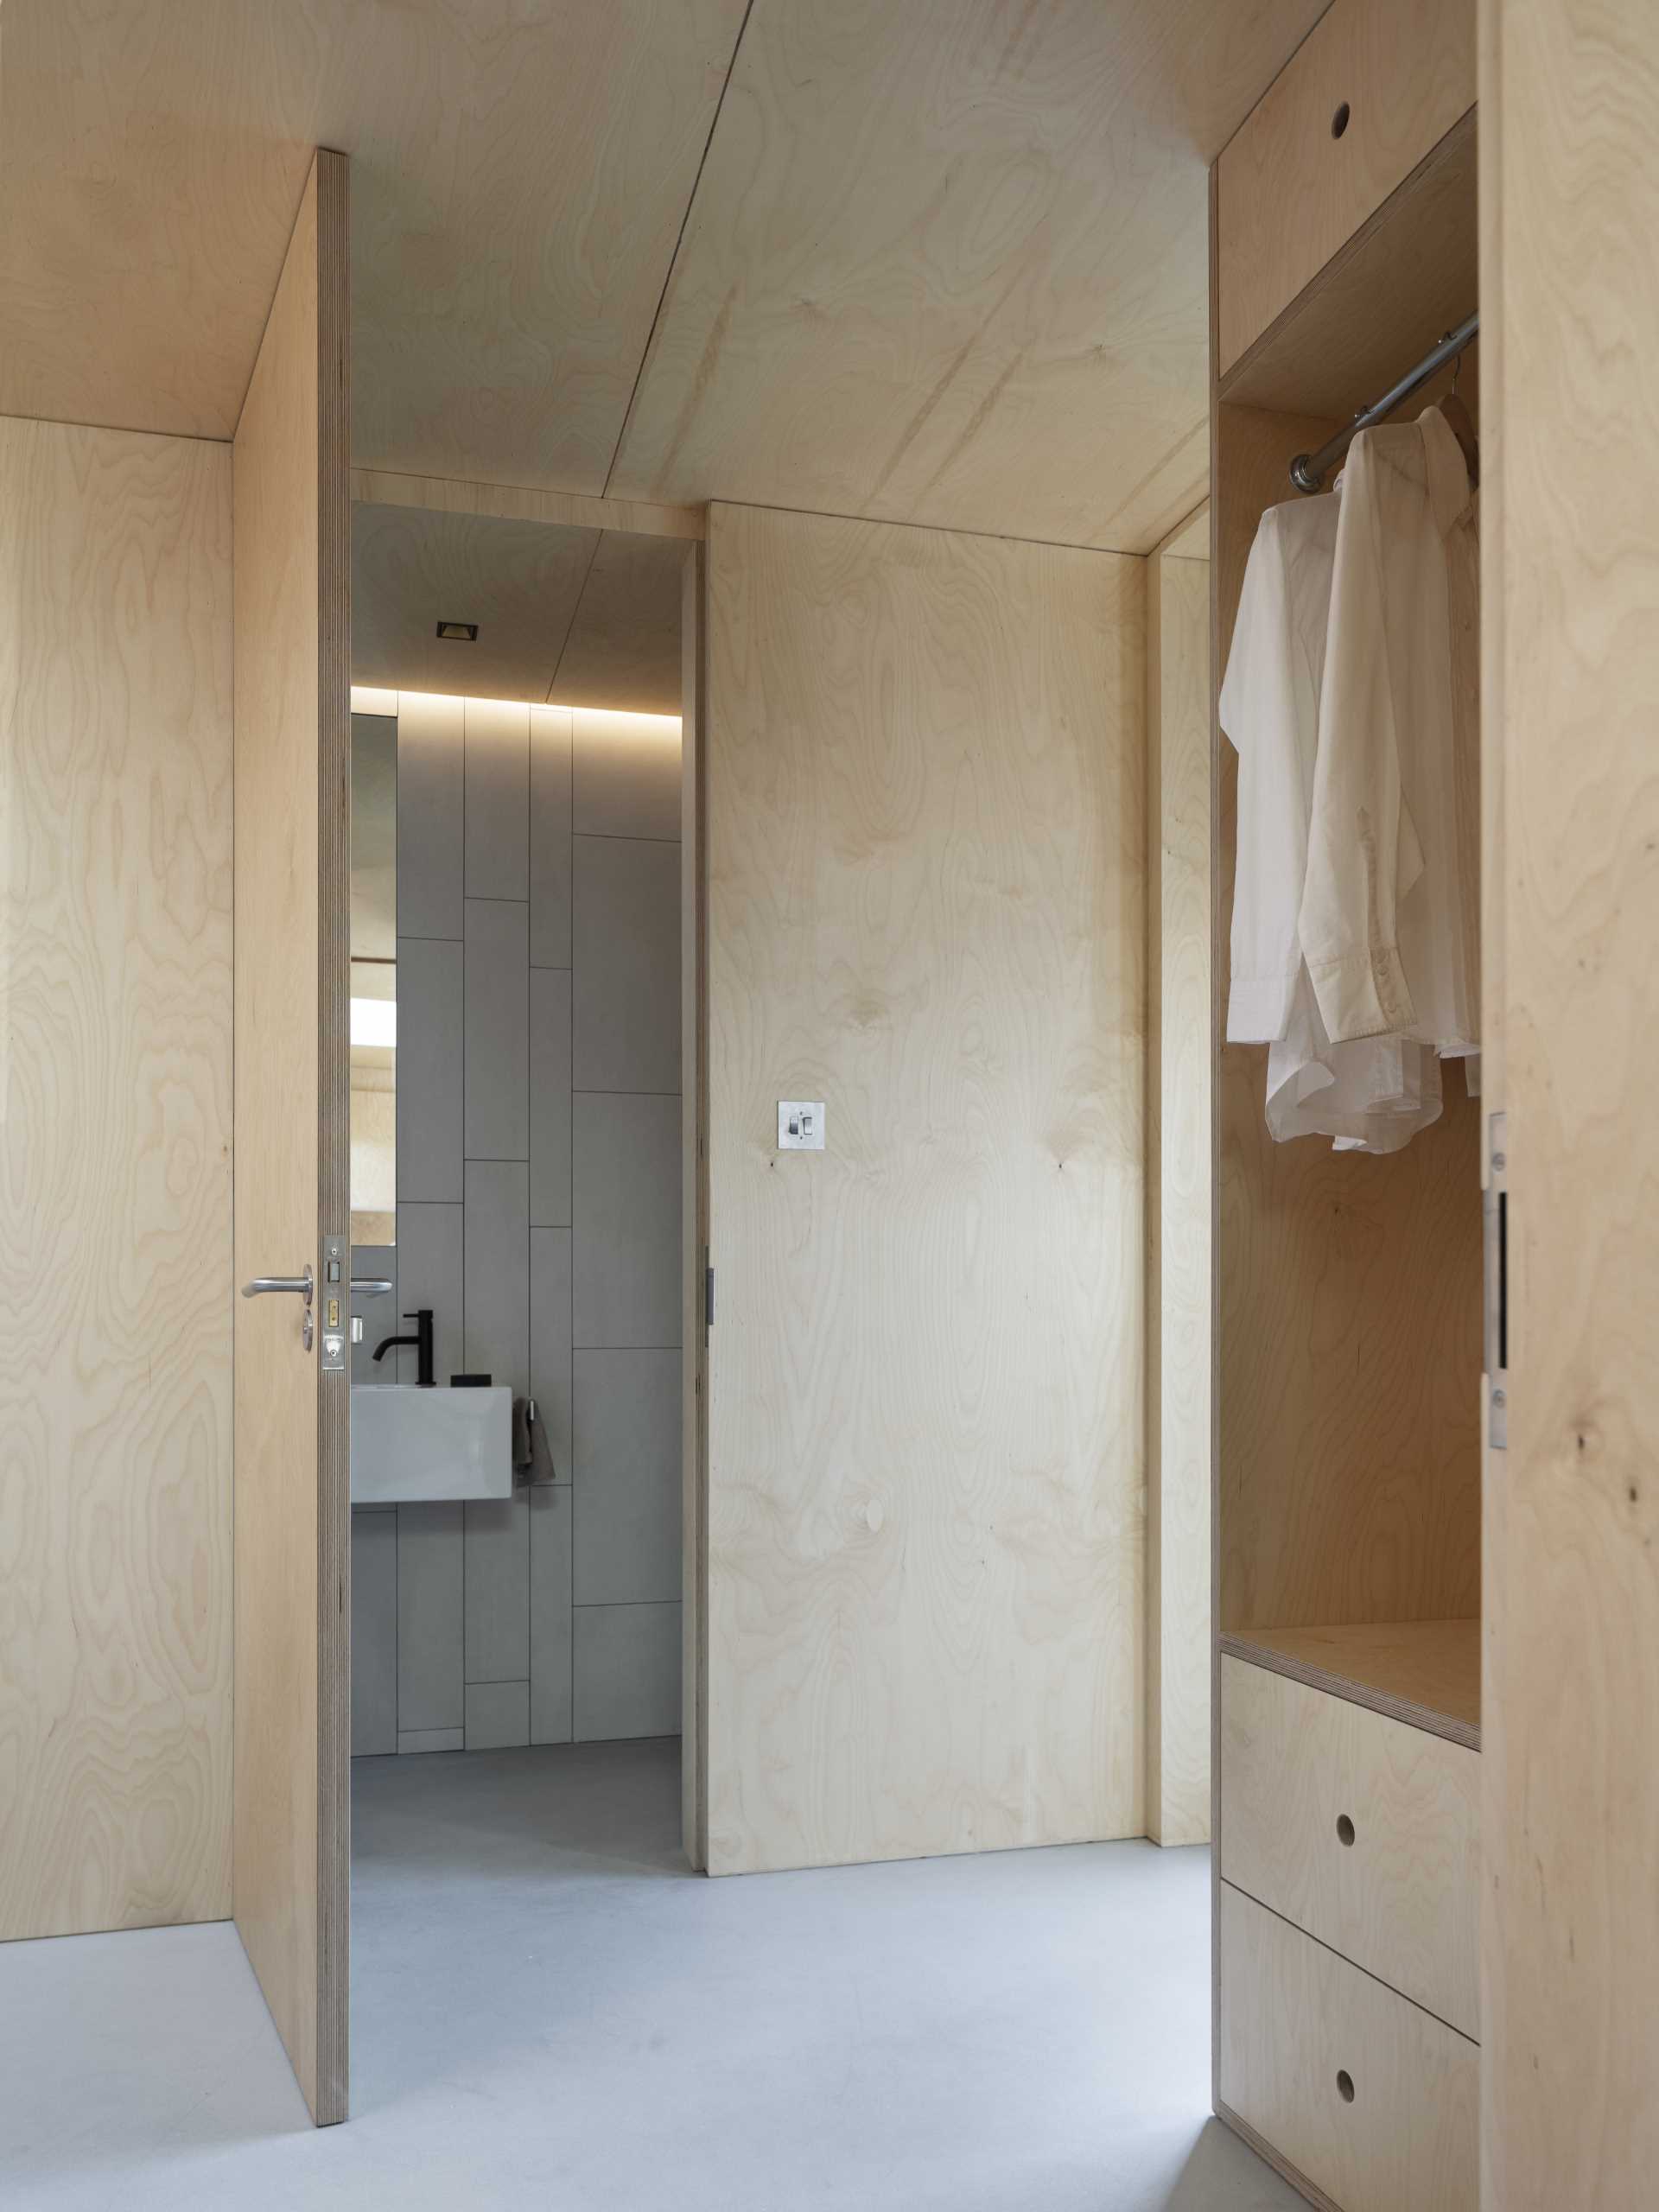 A guest suite with plywood walls and concrete floors.